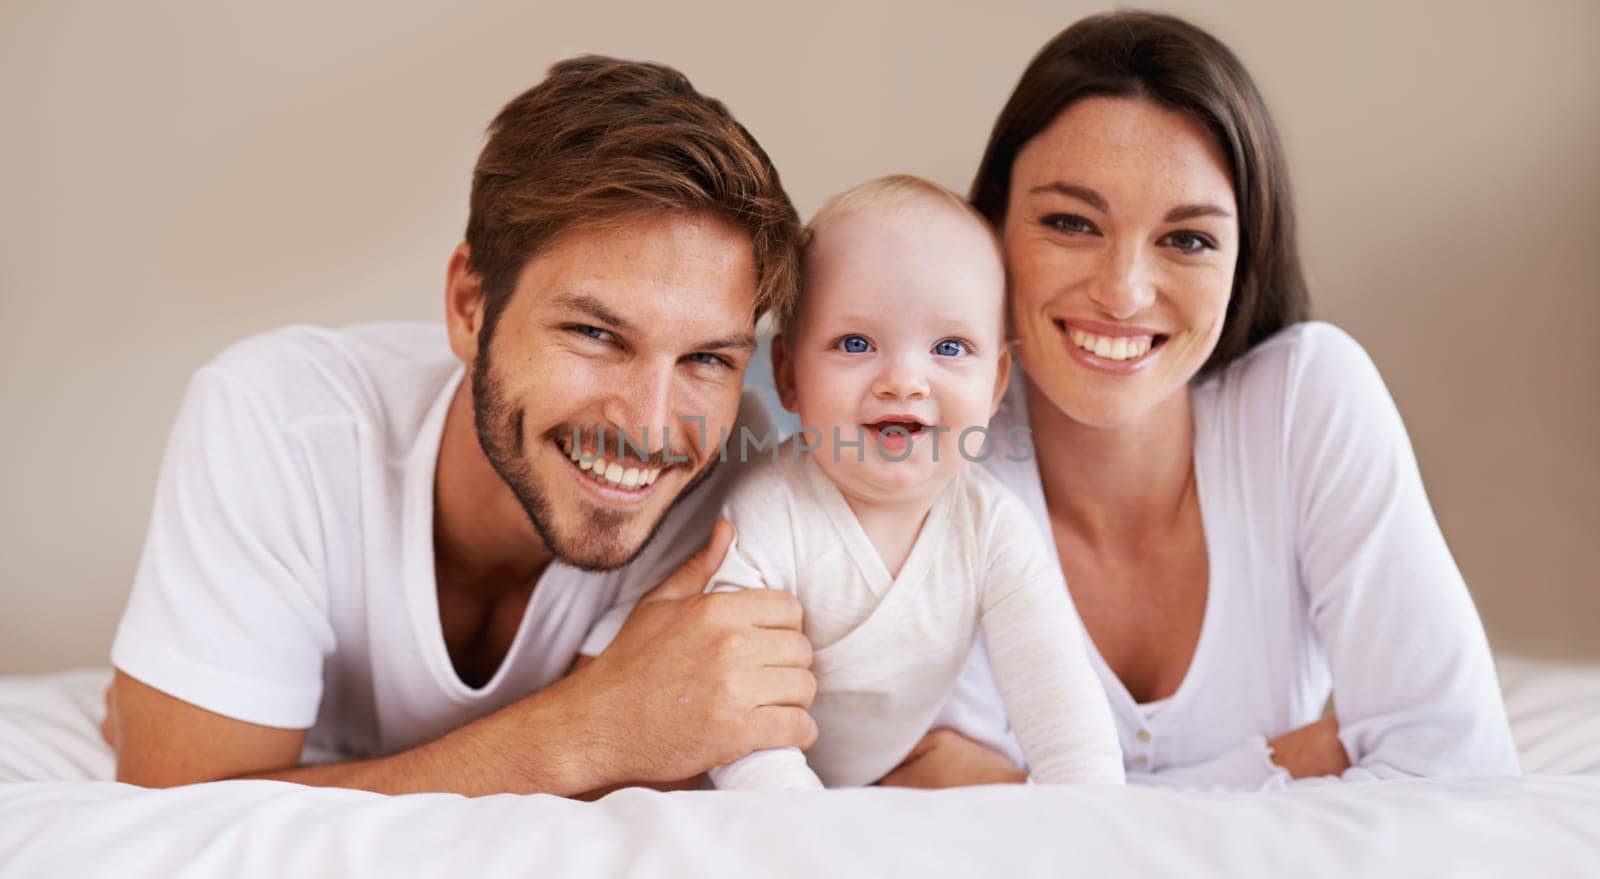 Happy portrait, dad and mom of baby kid on bed for love, care and quality time together to relax at home. Smile of family, parents and cute newborn child for development, caring support and happiness by YuriArcurs